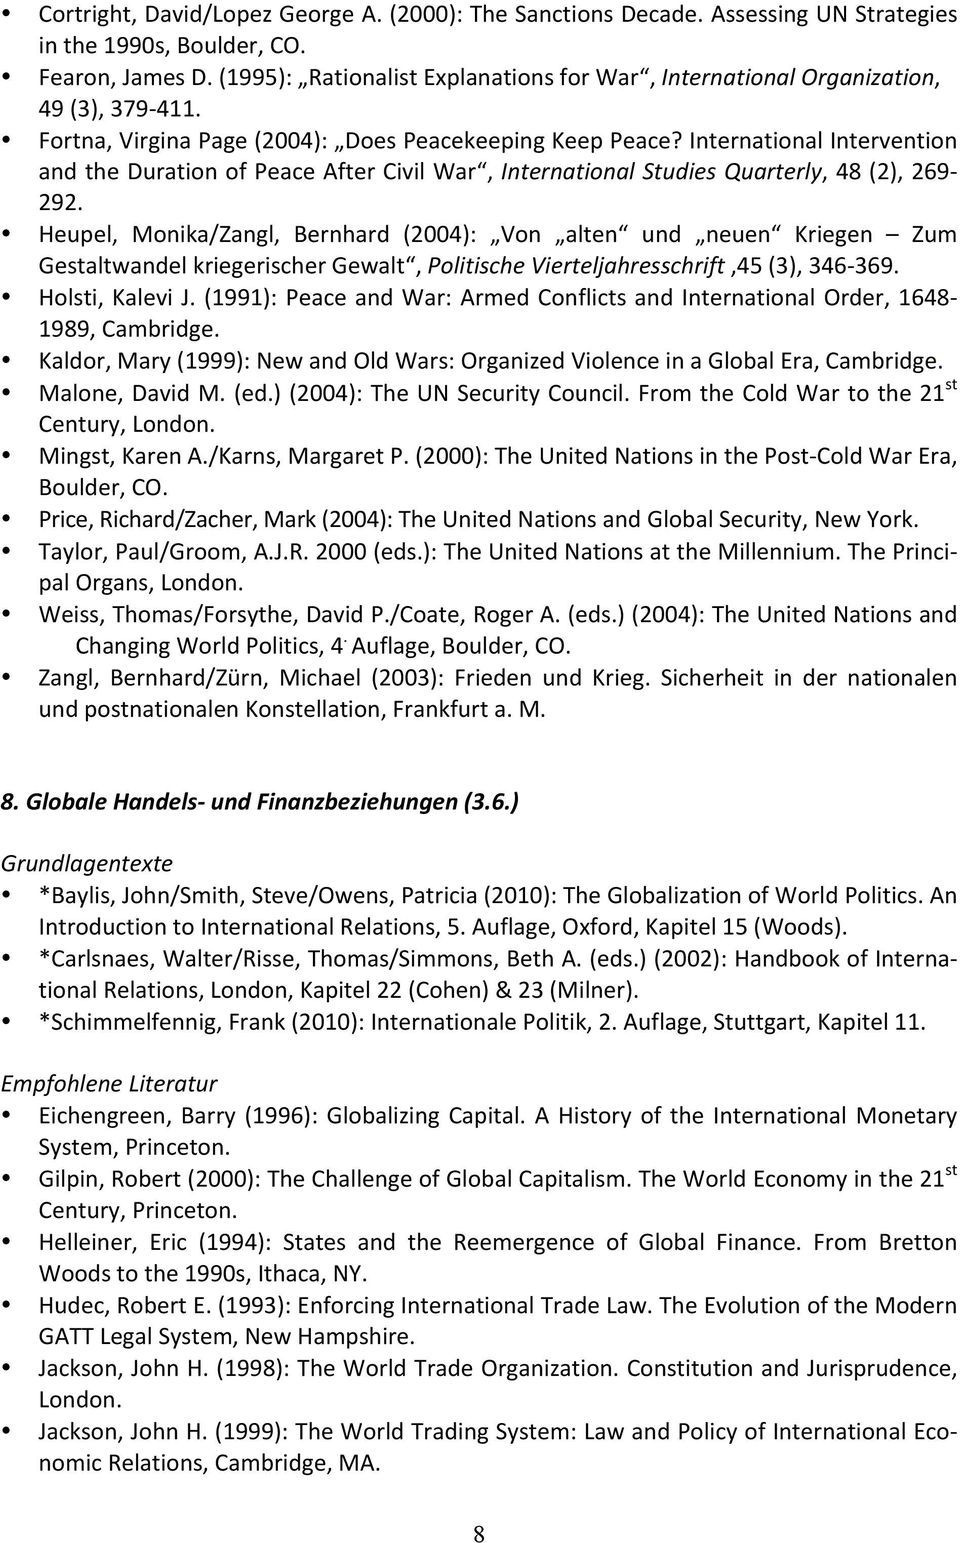 International Intervention and the Duration of Peace After Civil War, International Studies Quarterly, 48 (2), 269-292.